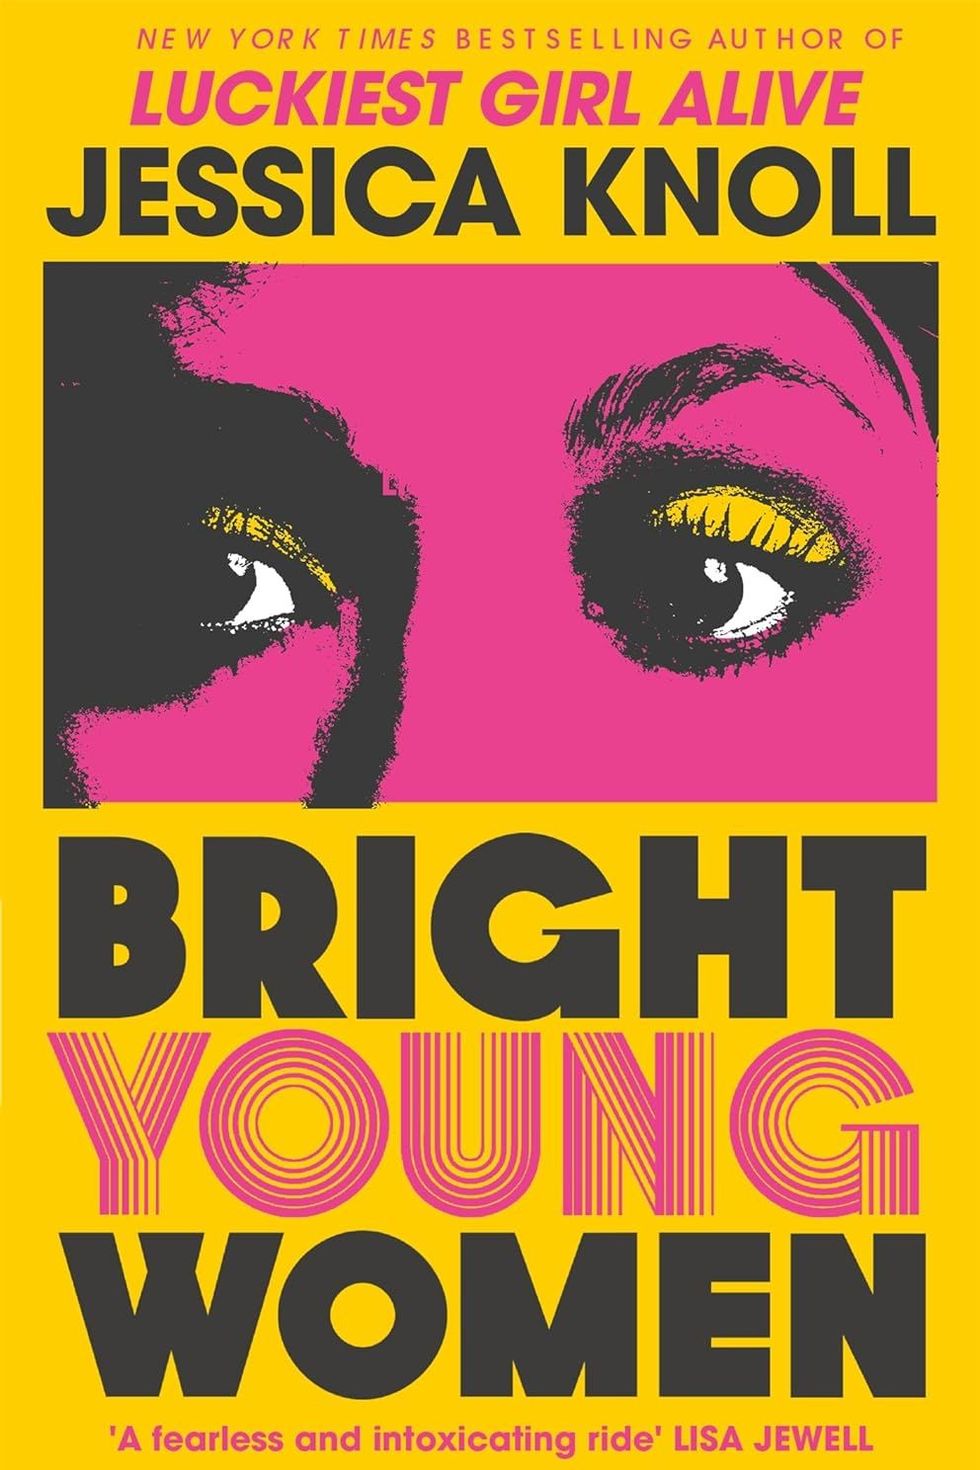 Jessica Knoll, 'Bright Young Women'